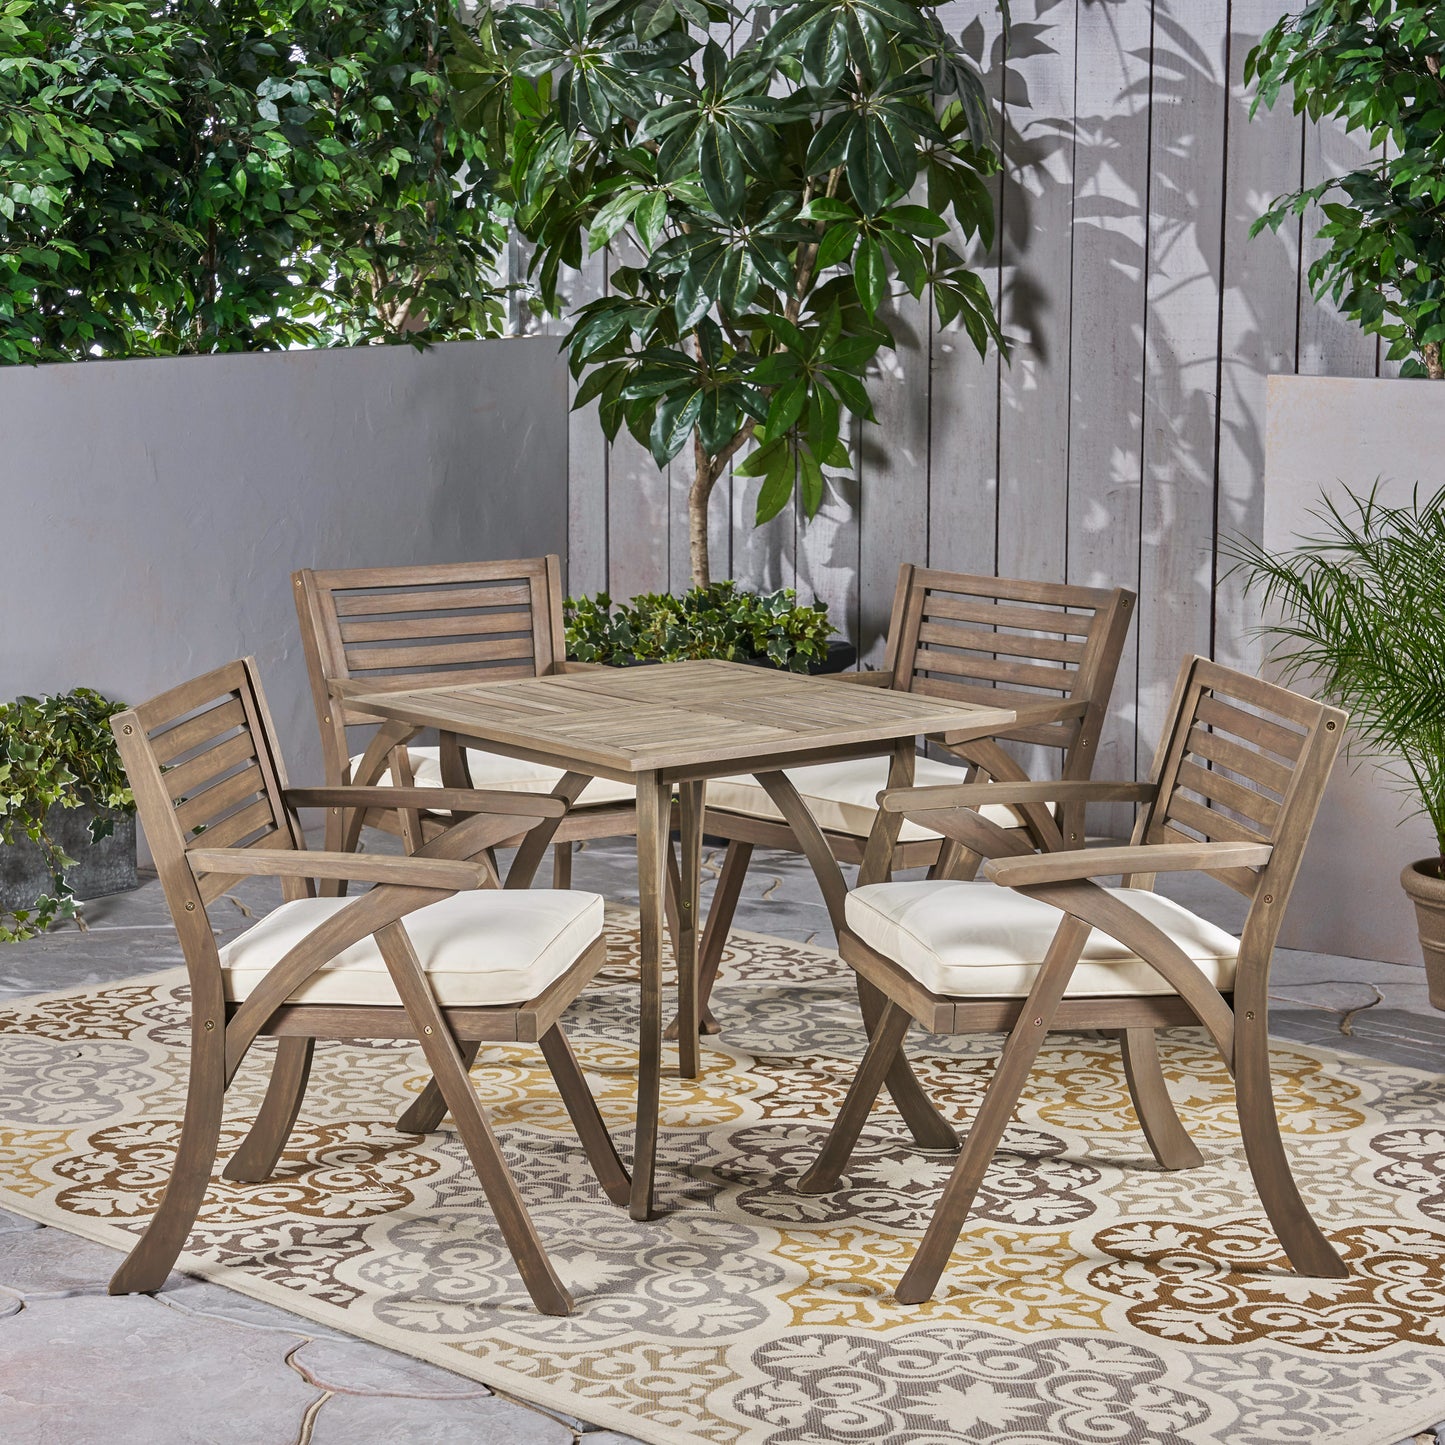 Hestia Outdoor 4-Seater Acacia Wood Dining Set with Square Table